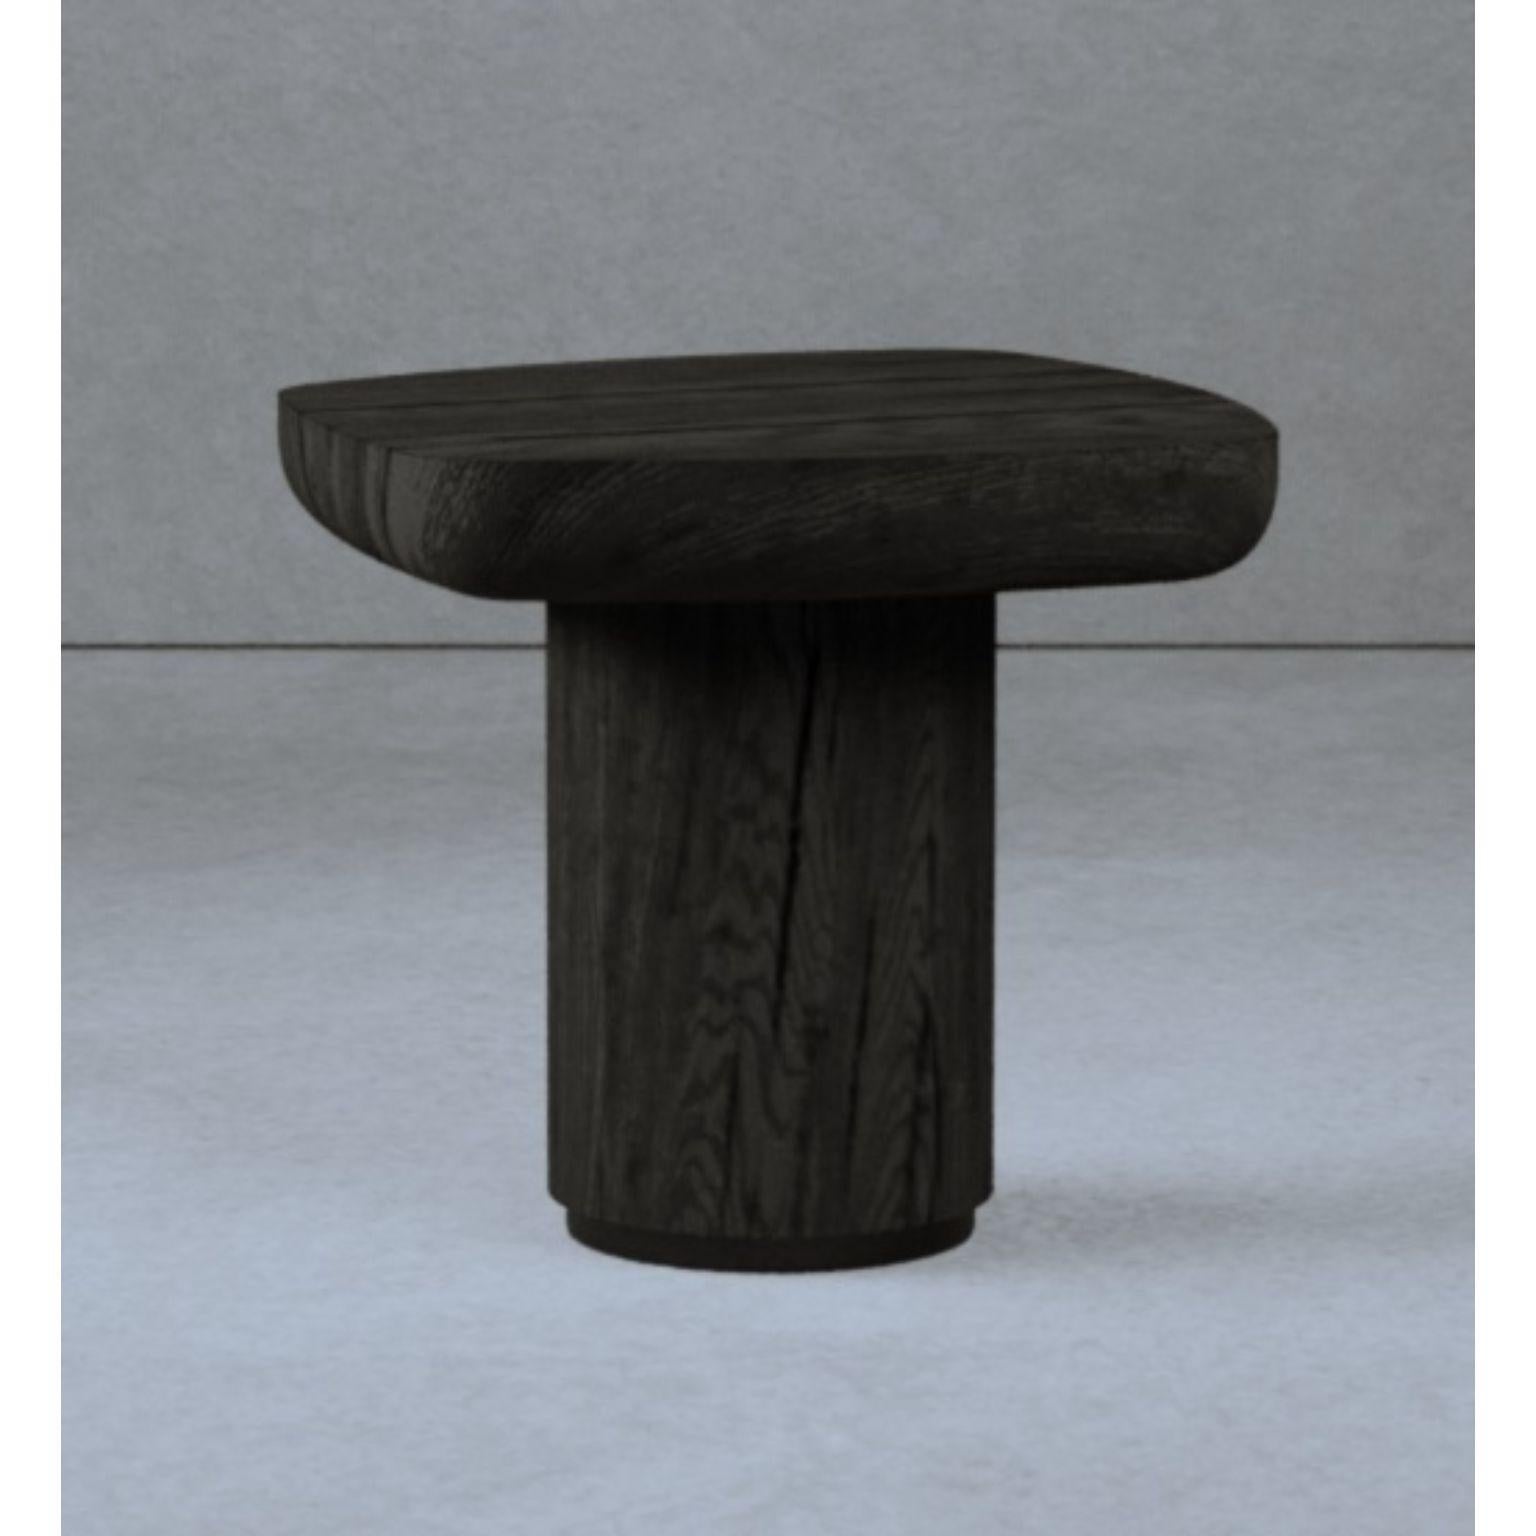 High Blackbird Wood Coffee Table by Gio Pagani
Dimensions: D 50 x W 50 x H 46 cm.
Materials: Fir Wood.

In a fluid society capable of mixing infinite social and cultural varieties, the nostalgic search for reworked aesthetics that unite distant